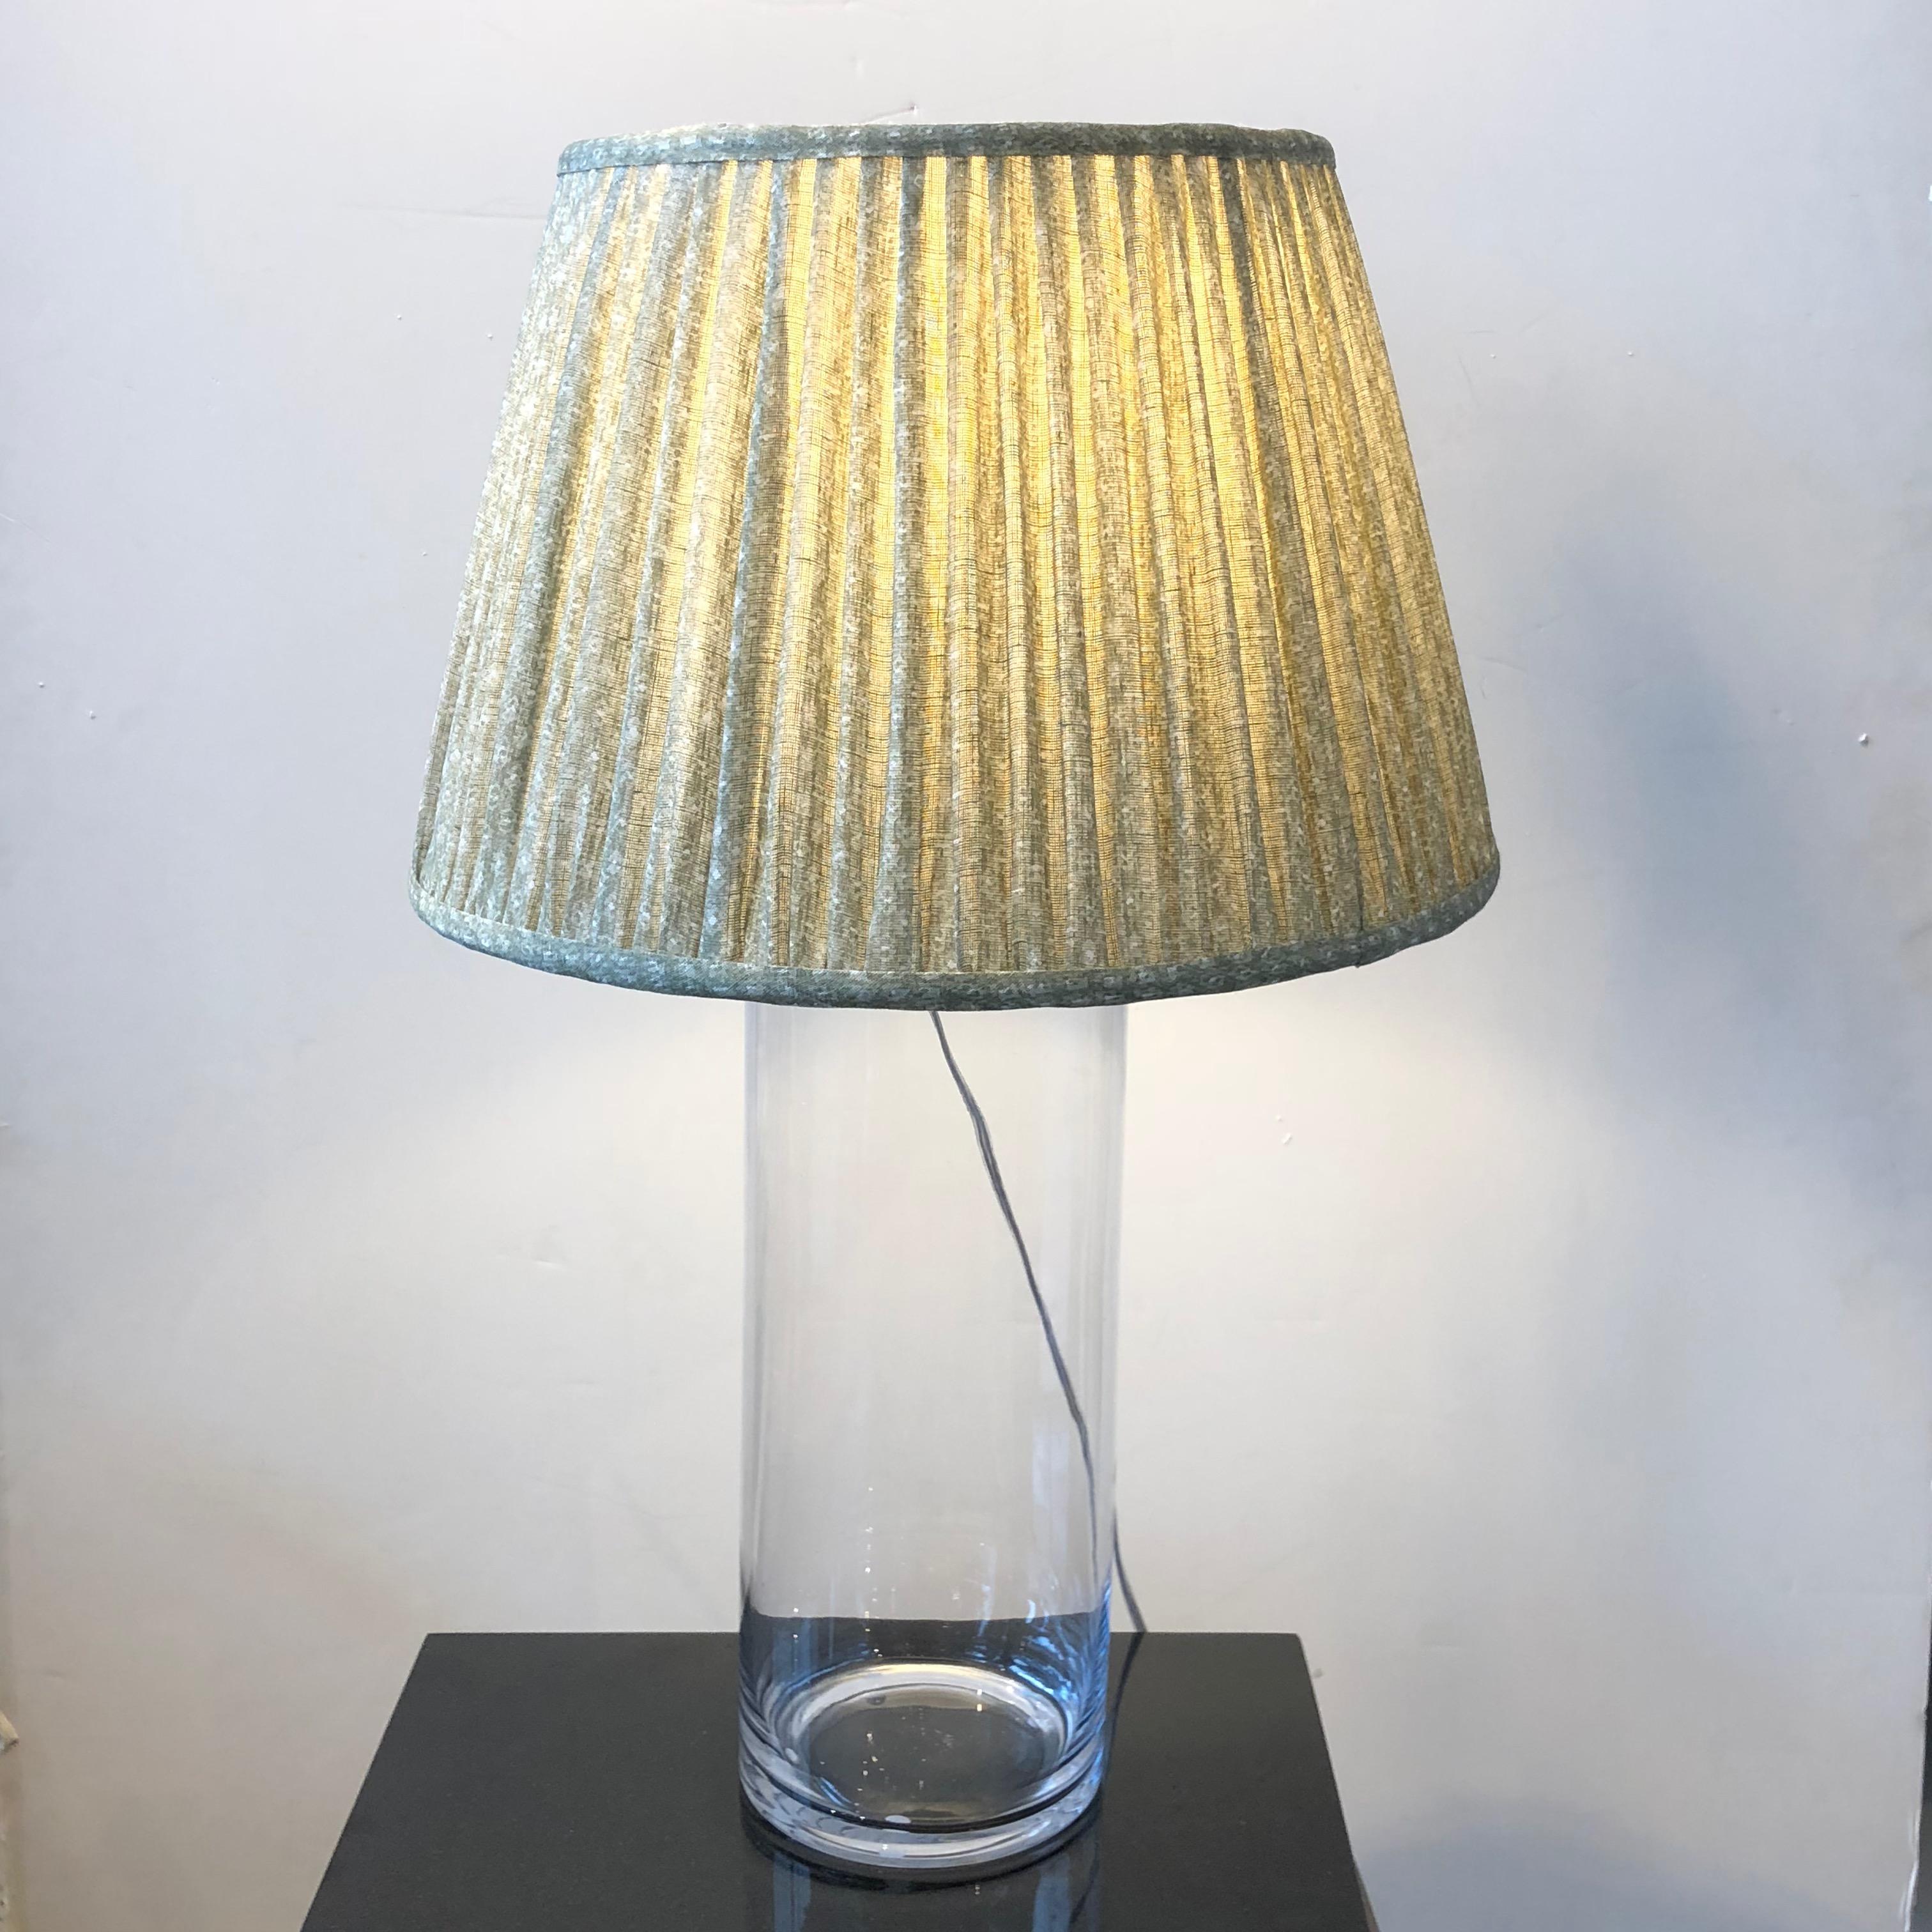 Clear glass cylinder lamp with brass hardware.
Custom shade sold separately.